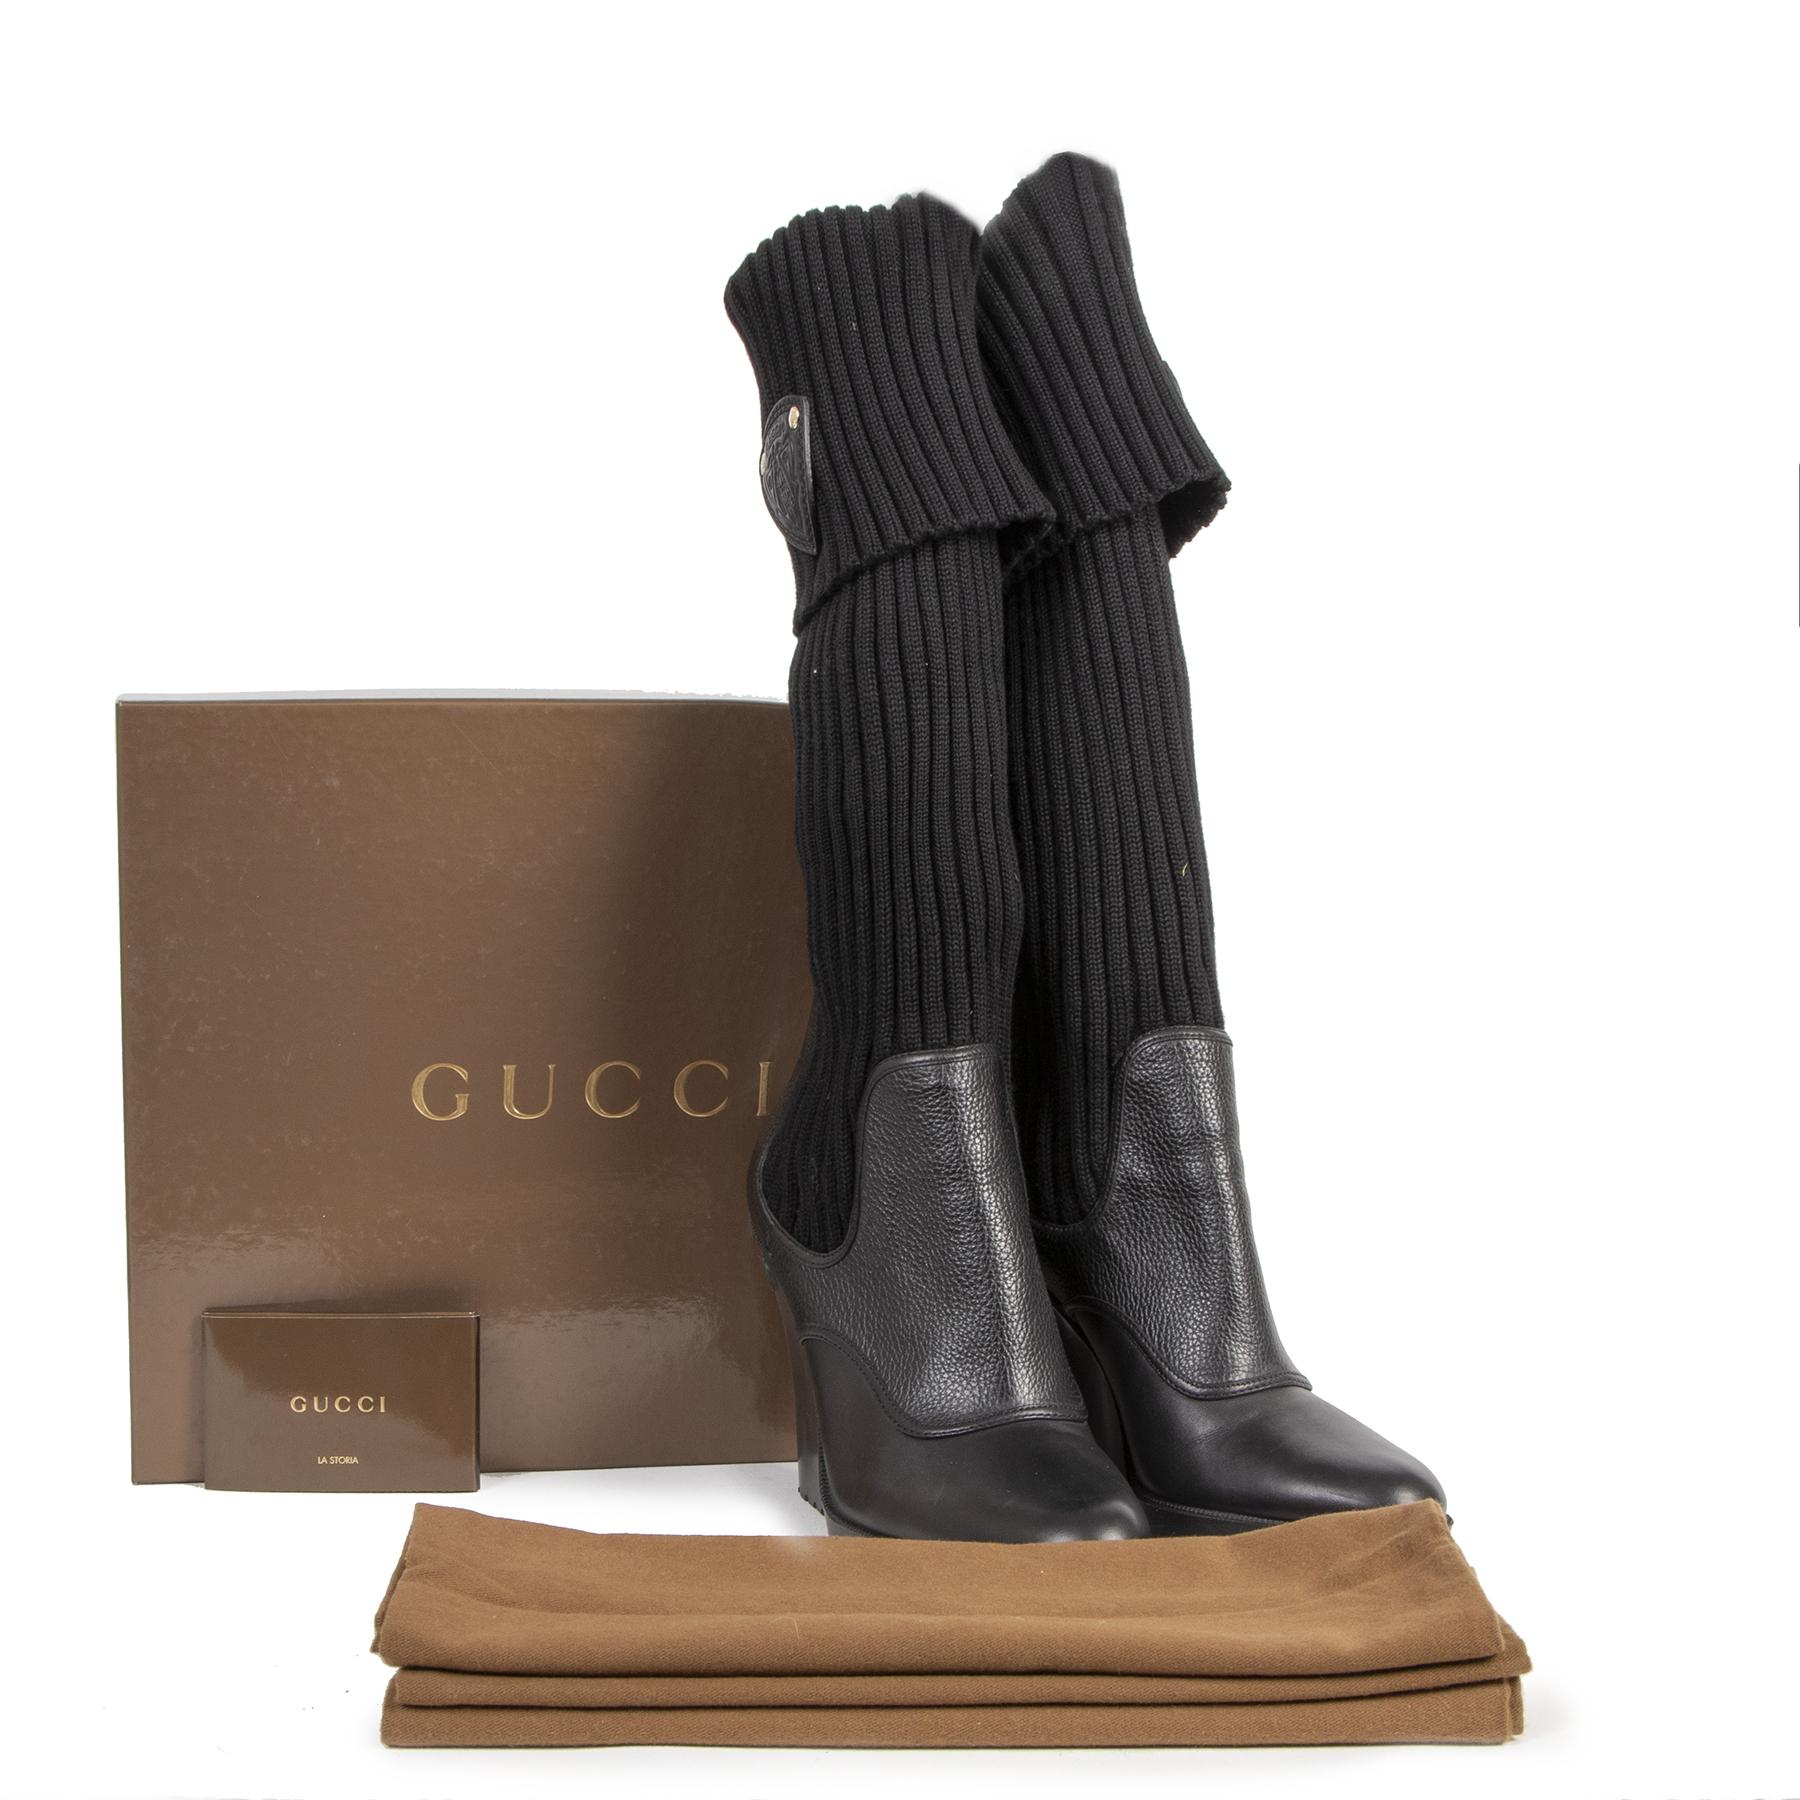 Excellent preloved condition

Gucci Black Wedge Sock Boots - size 41

These gorgeous Gucci wedge knit sock boots are definitely worth checking out. These wedge boots are crafted out of black leather and black fabric, perfect to keep it warm and cosy